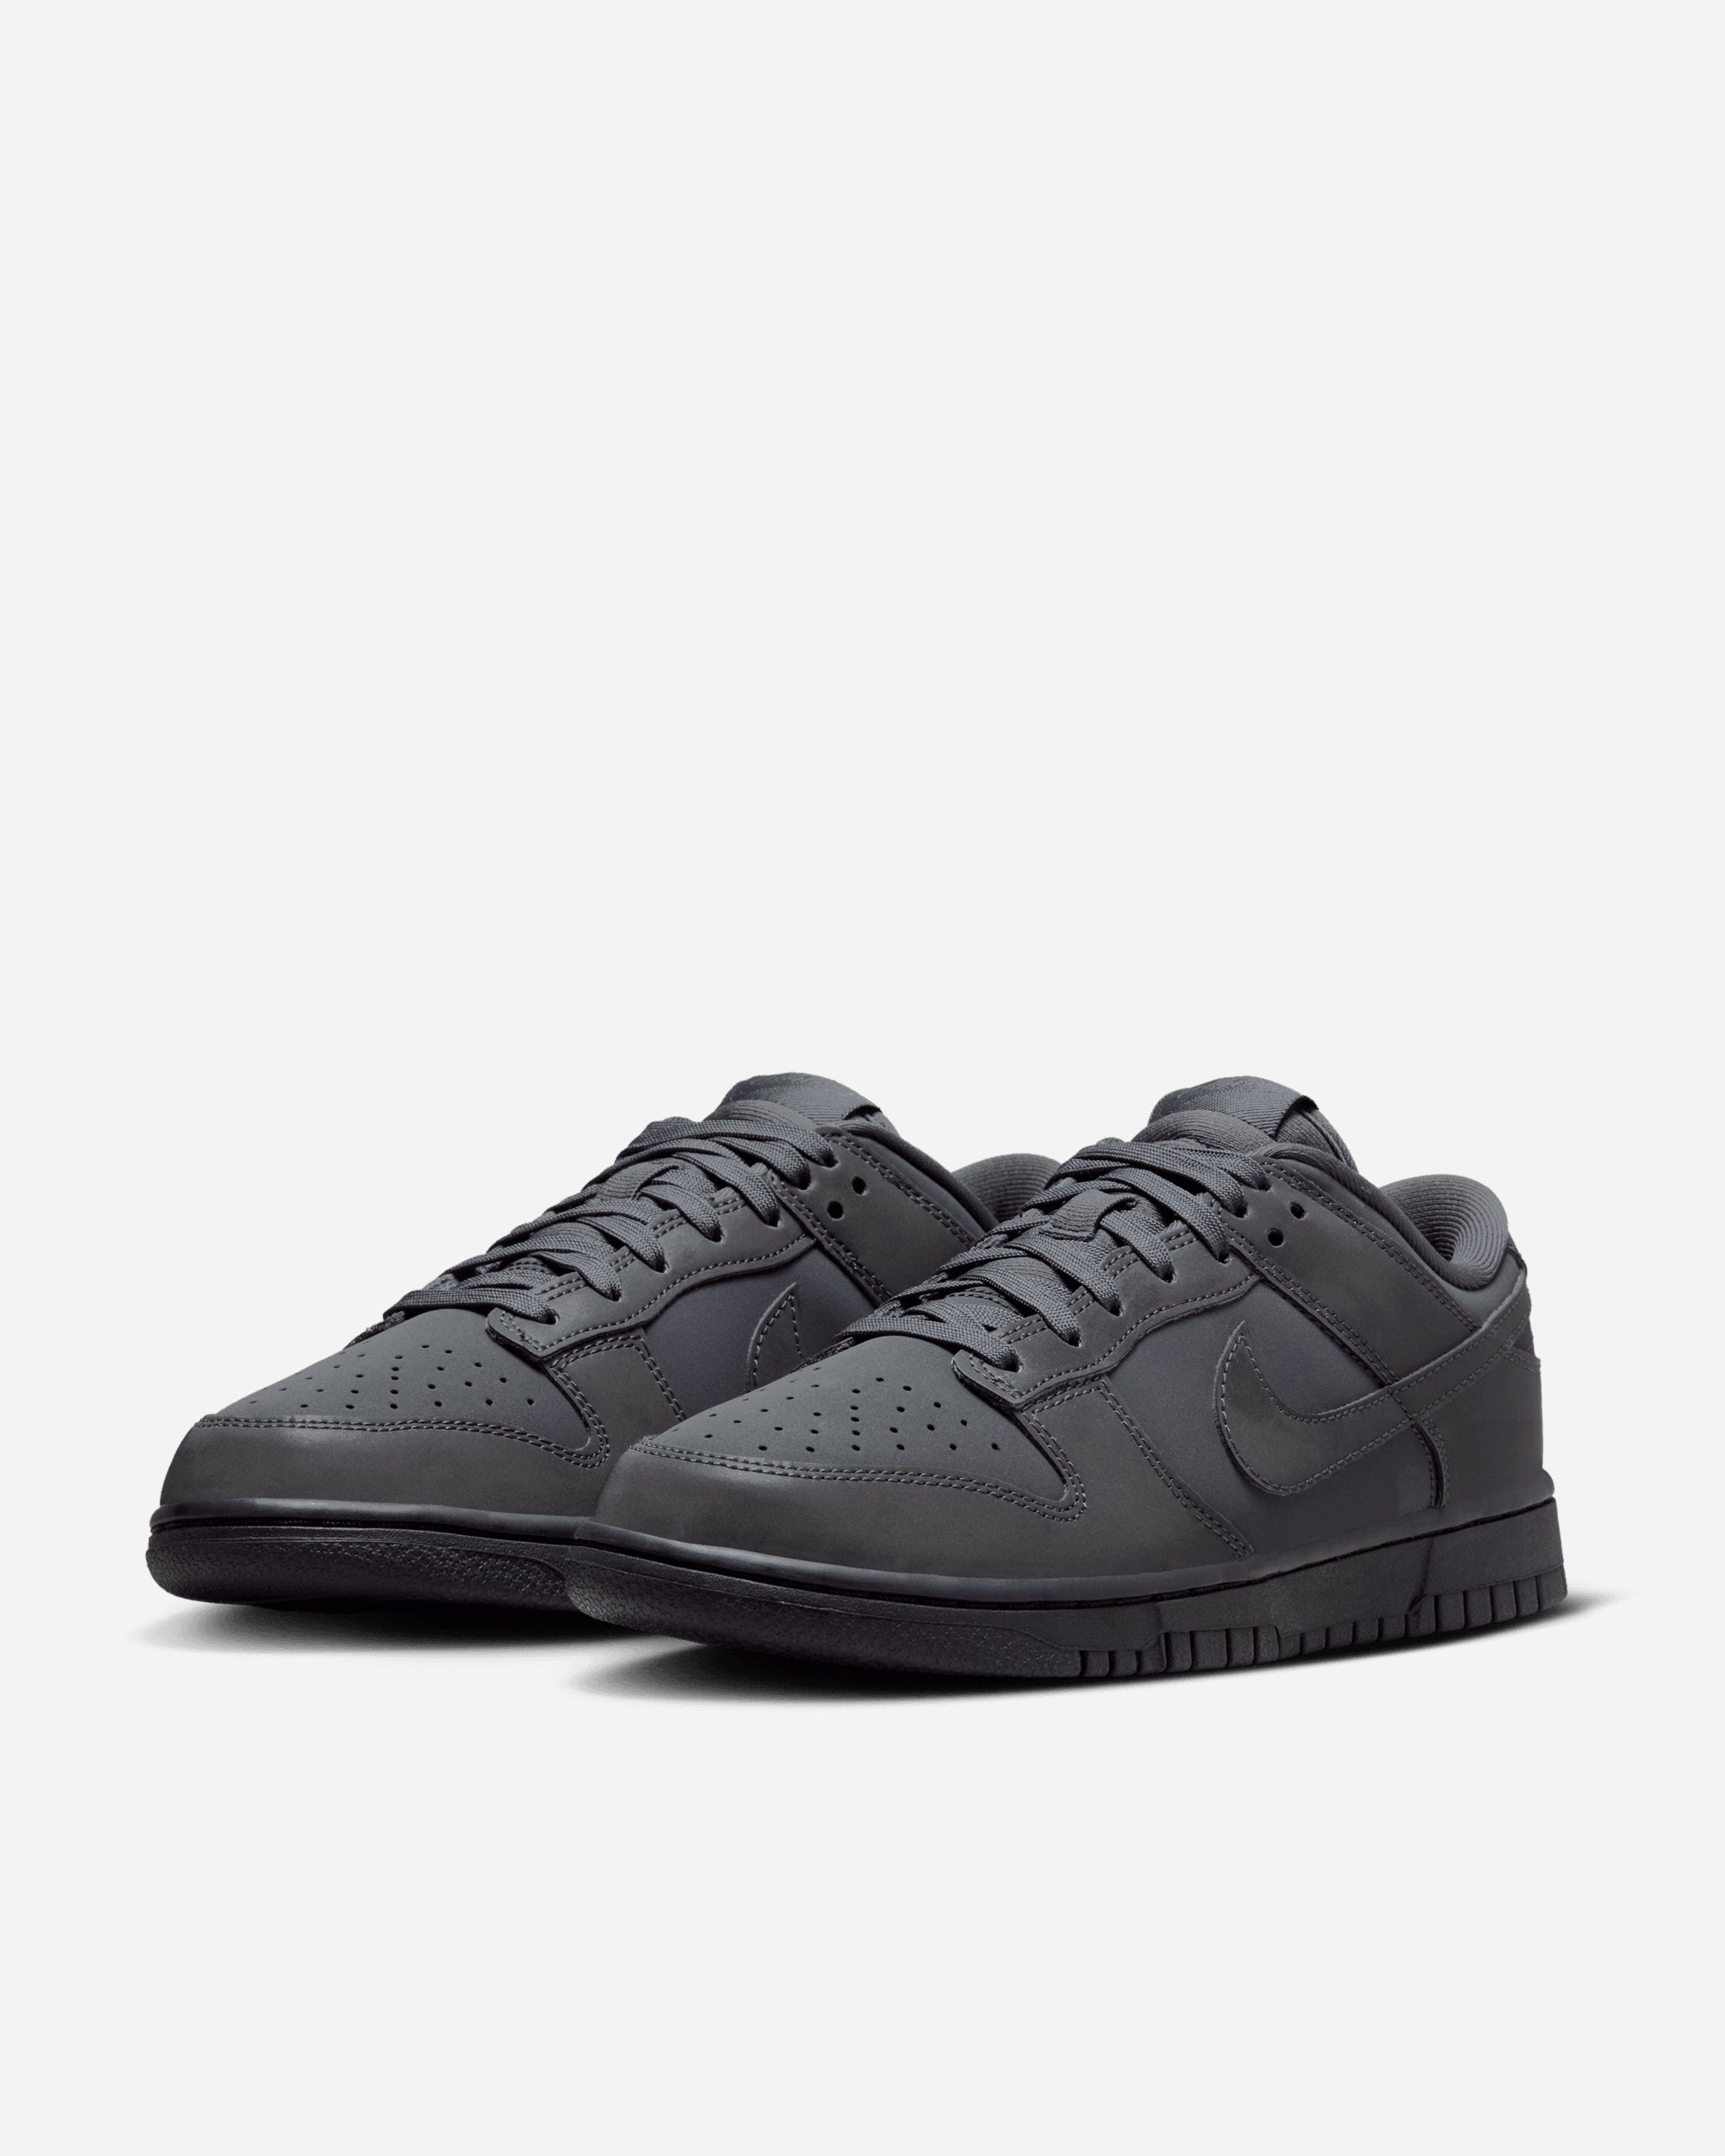 Nike Dunk Low 'Cyber Reflective' ANTHRACITE/BLACK-RACER BLUE FZ3781-060